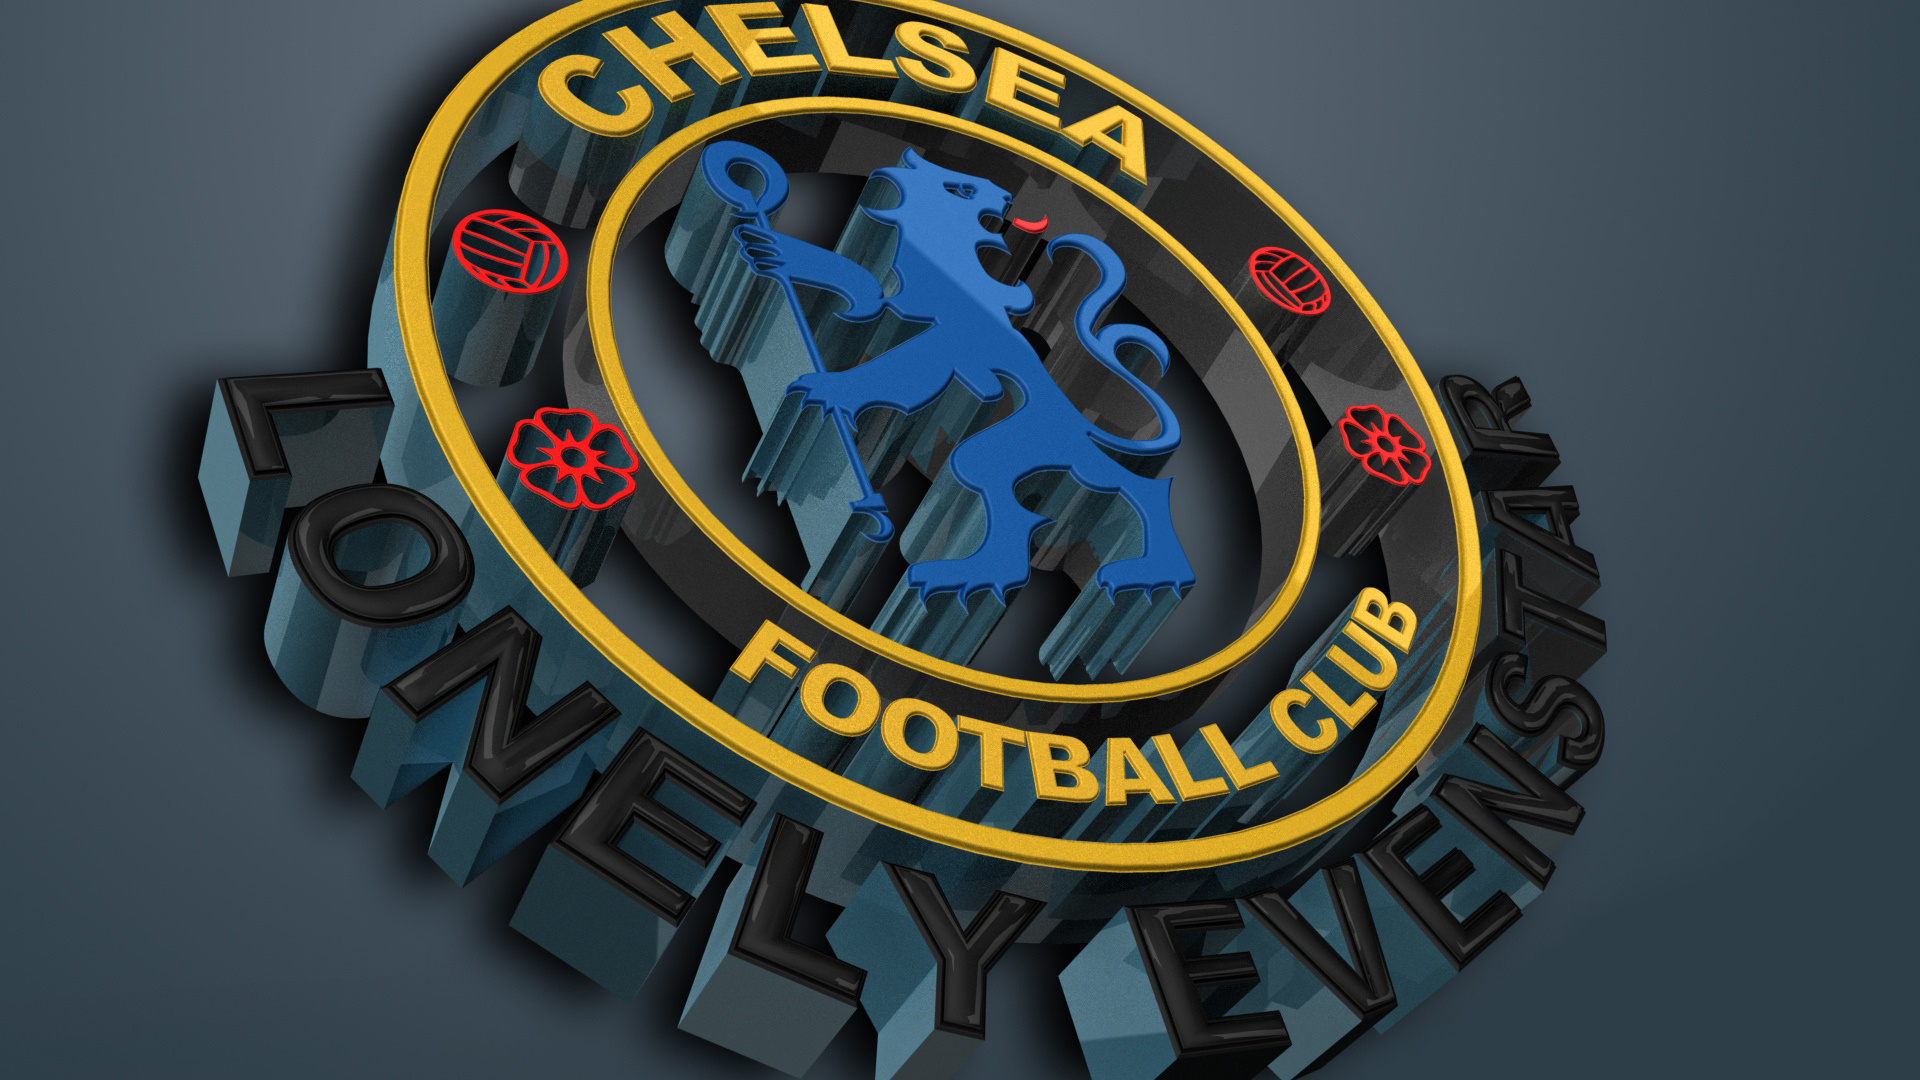 Chelsea: Nicknamed 'The Blues', Lifted the Champions League for the first time in 2012. 1920x1080 Full HD Wallpaper.